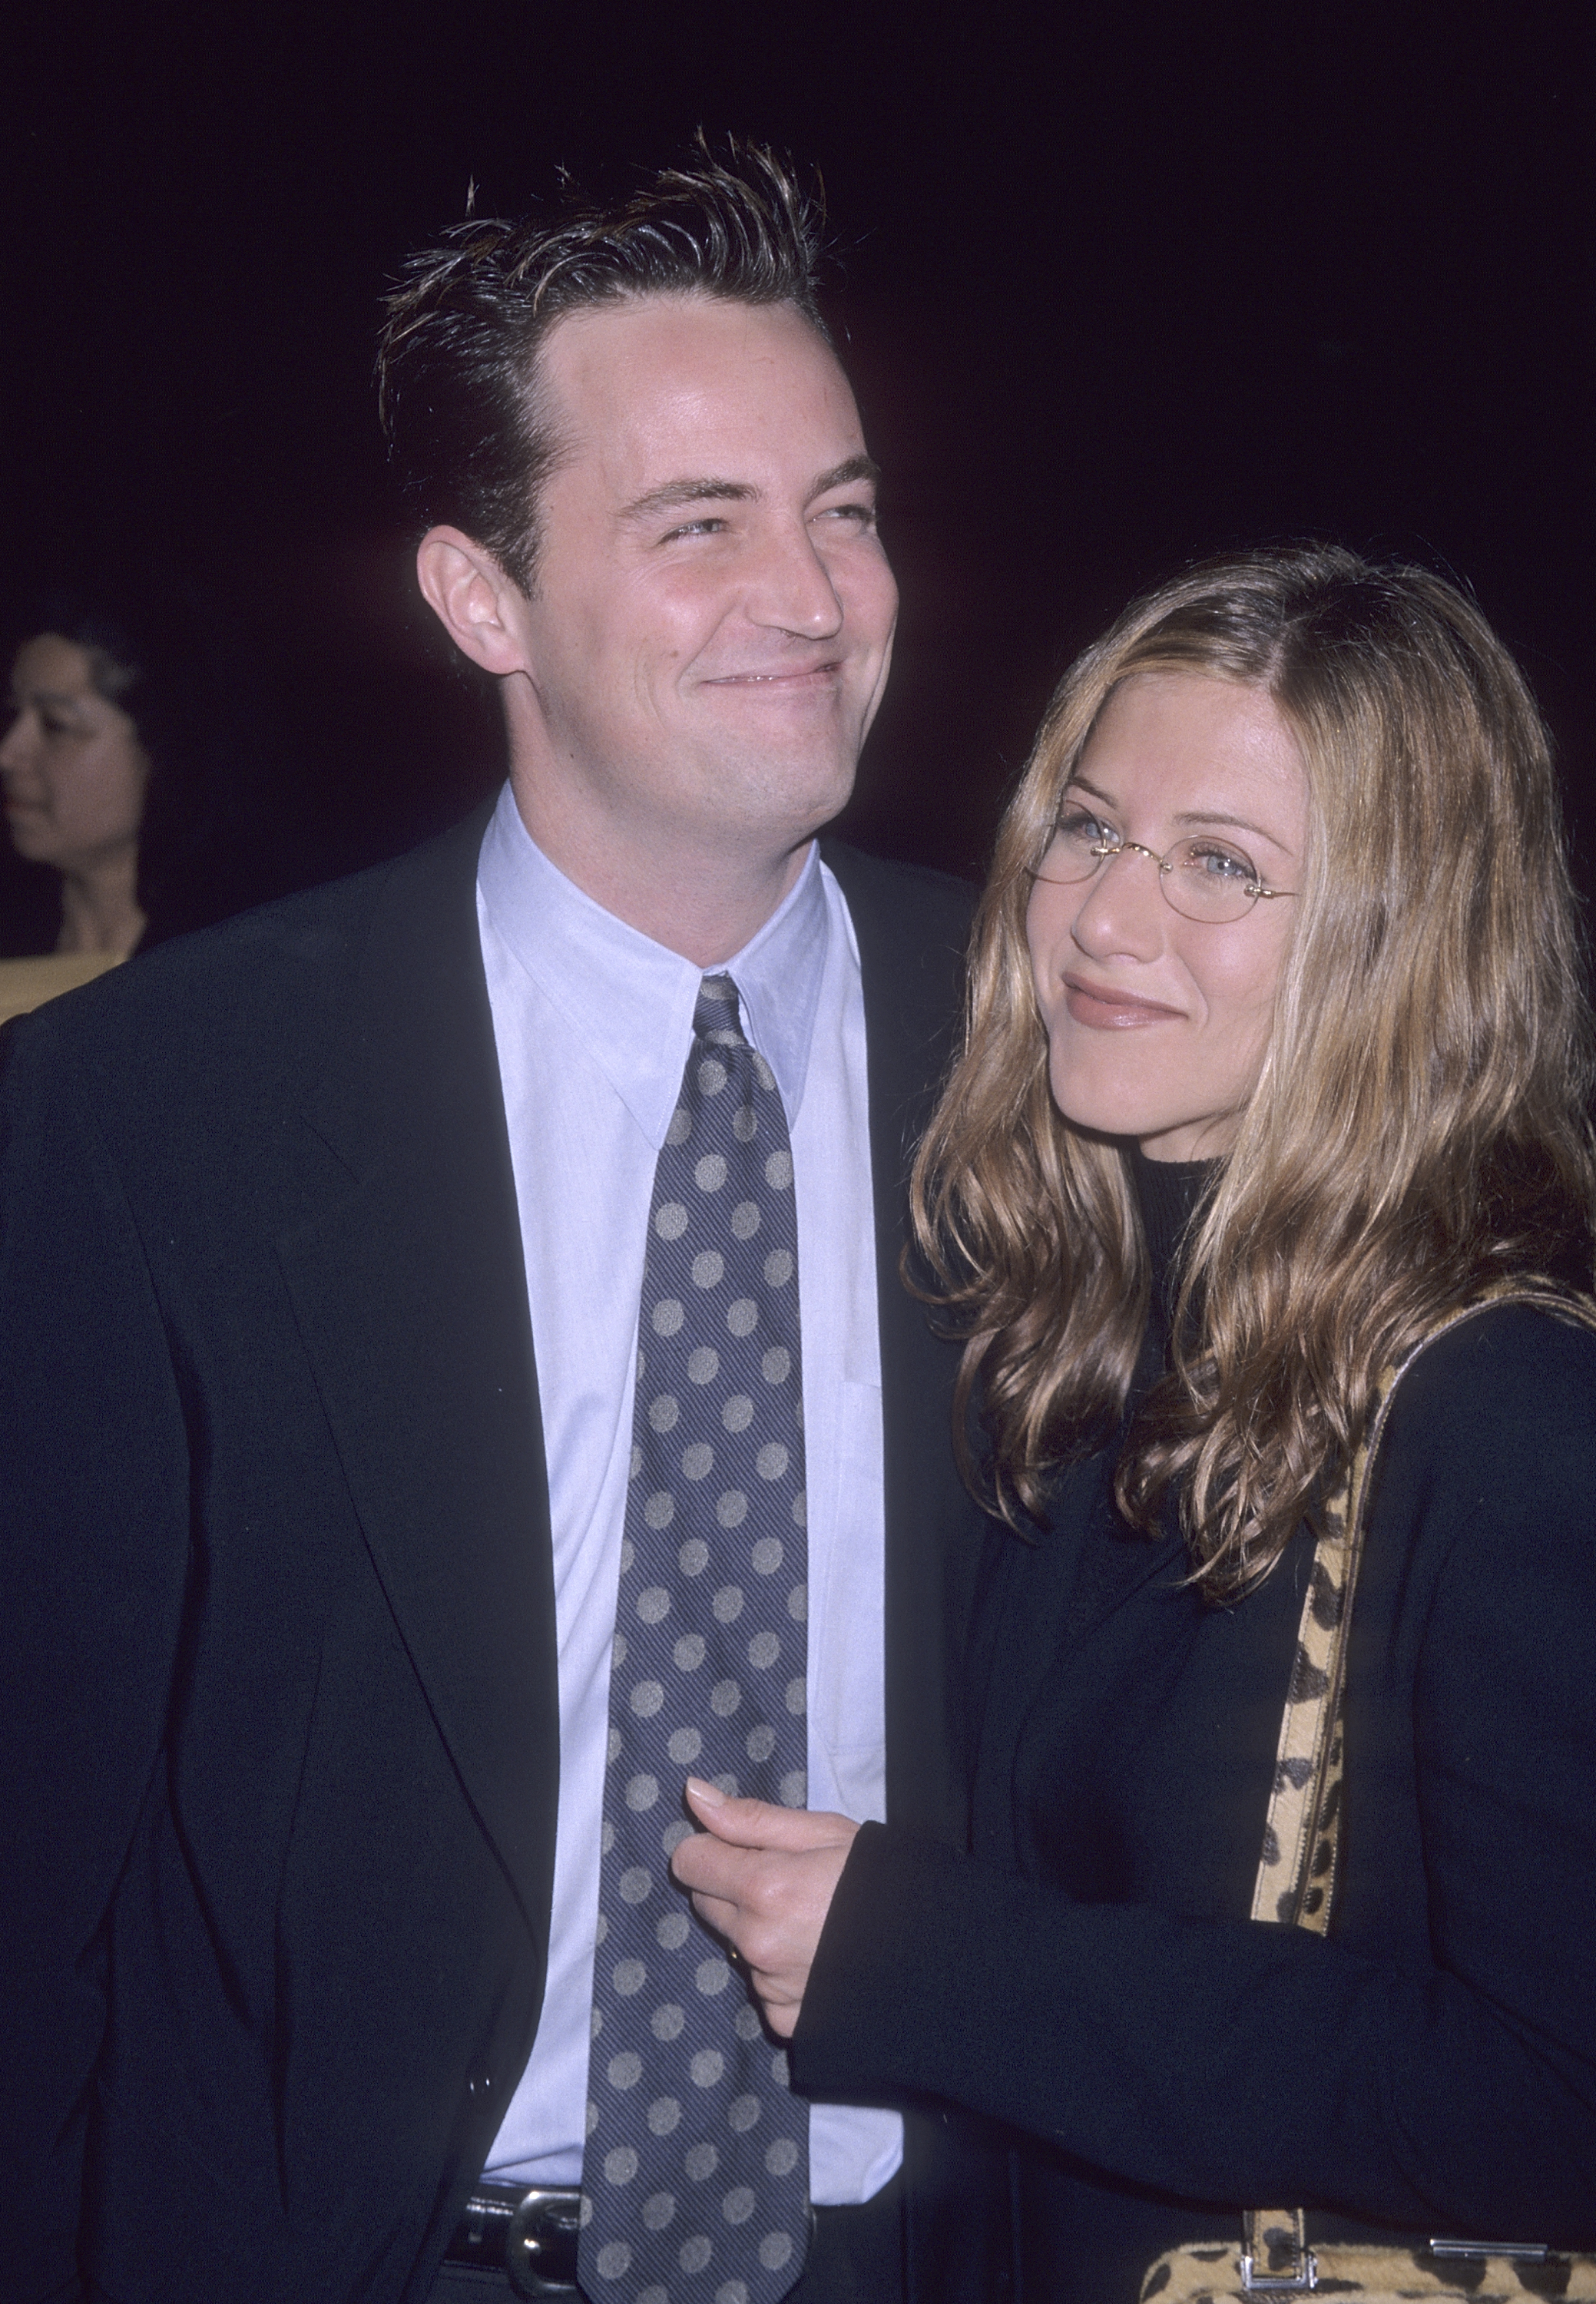 Matthew Perry and Jennifer Aniston at the "Kissing a Fool" premiere on February 18, 1998 in Westwood, California | Source: Getty Images